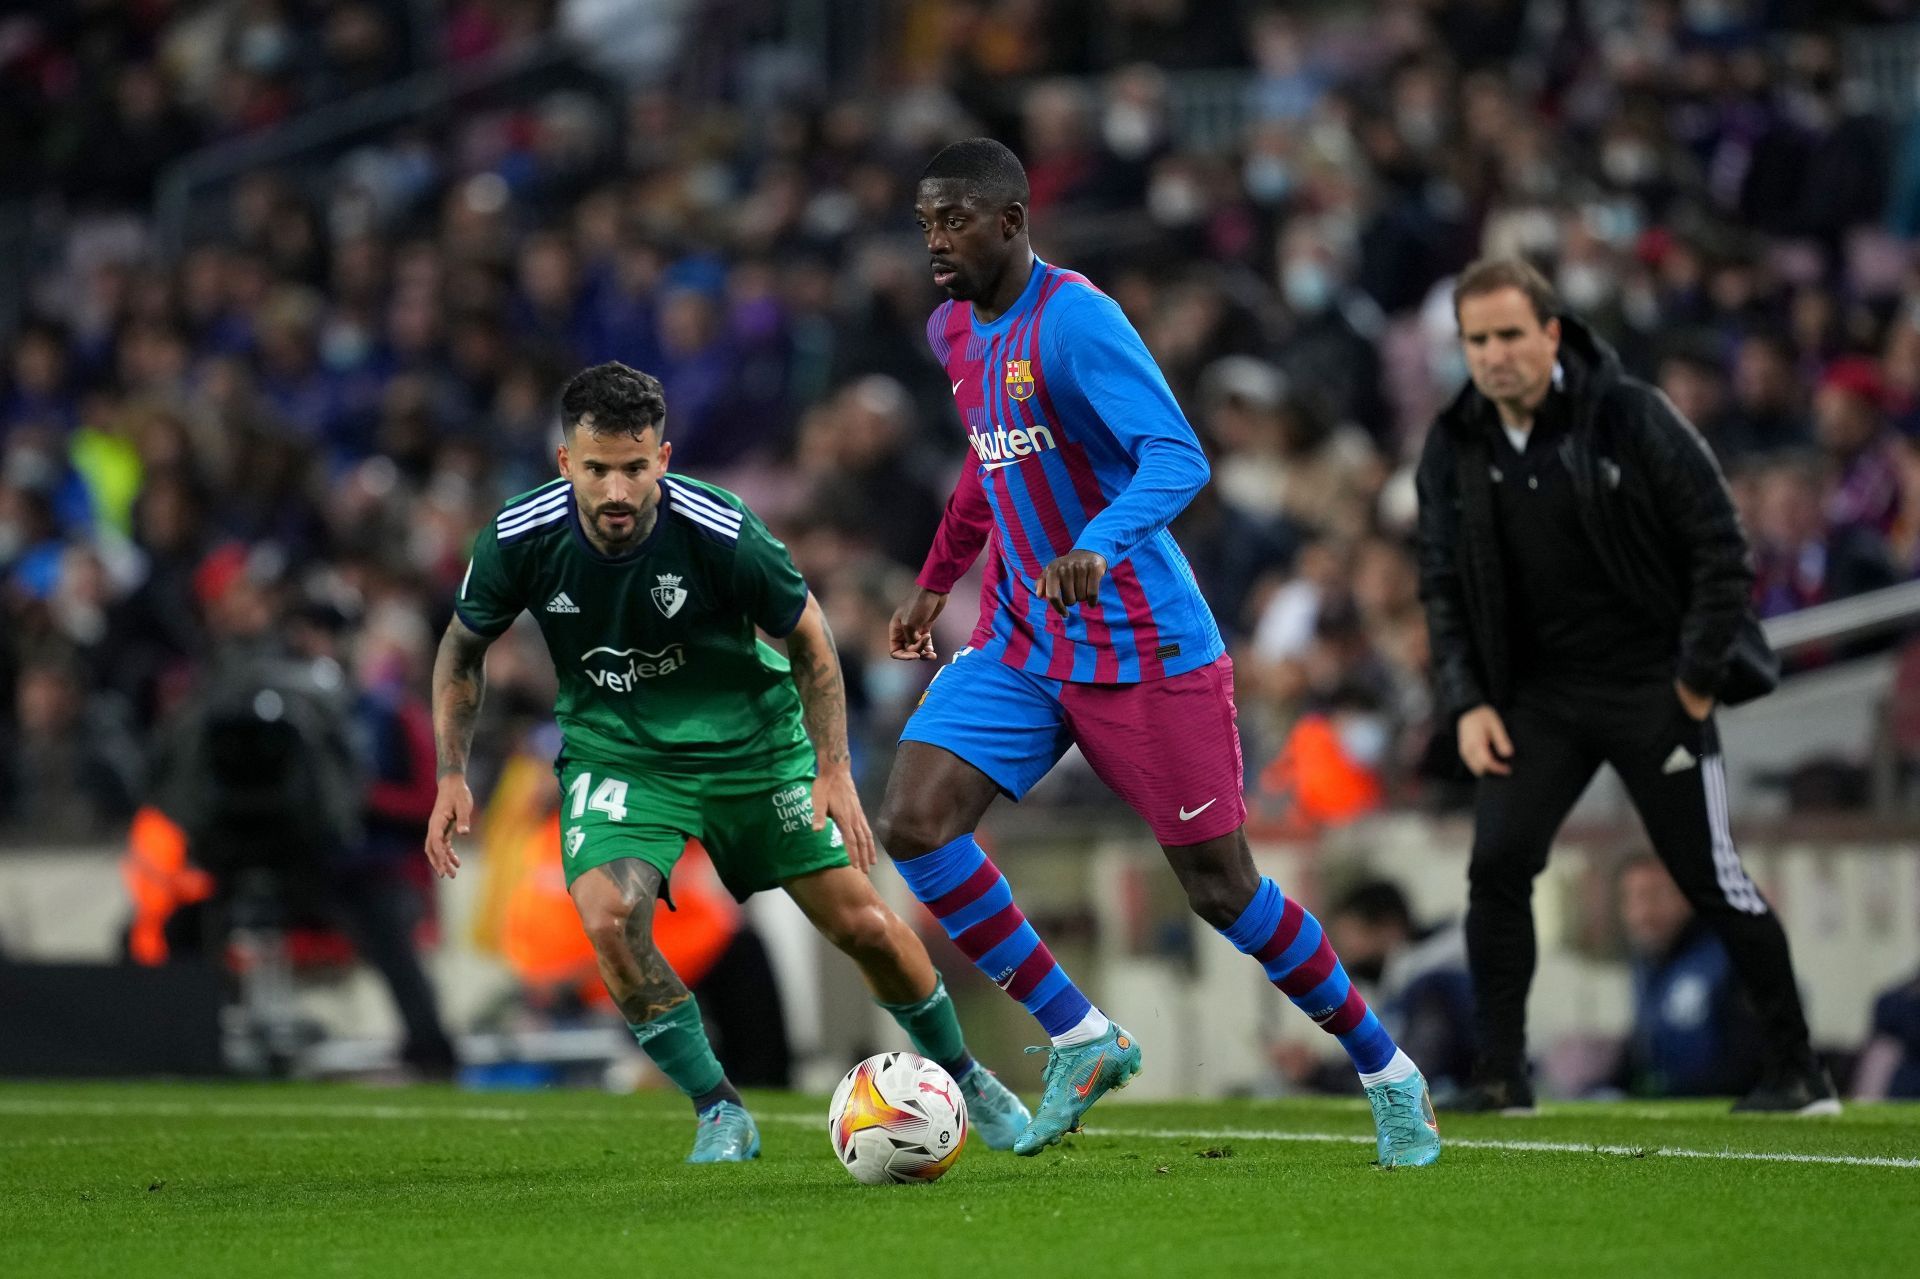 Dembele in action for Barcelona